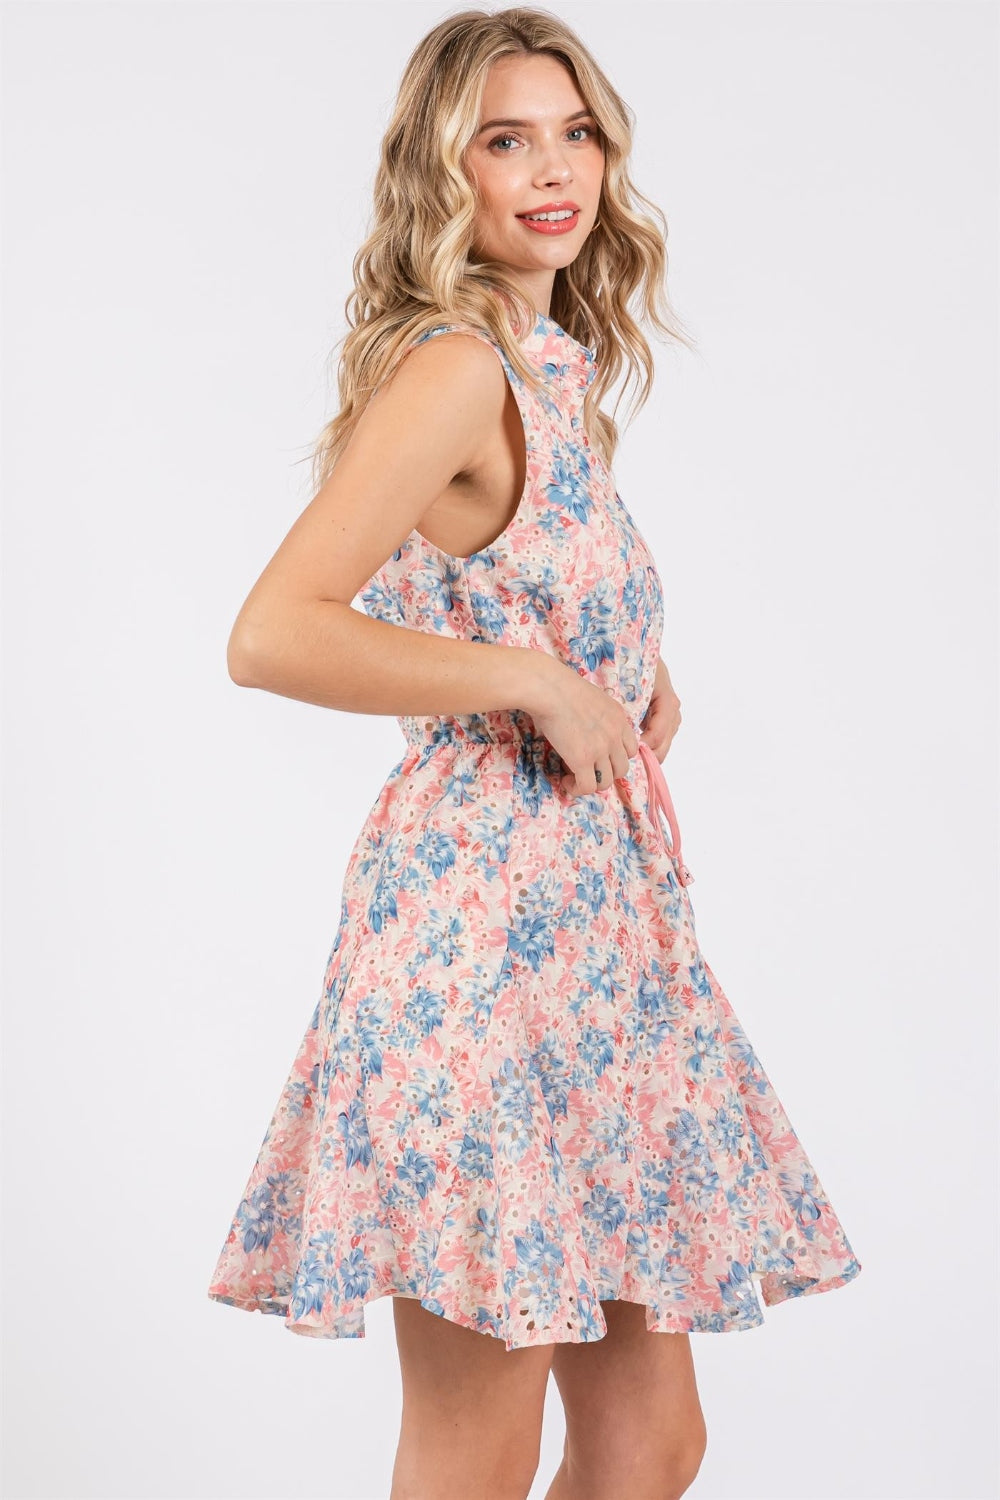 GeeGee Full Size Floral Eyelet Sleeveless Mini Dress-Dresses-Inspired by Justeen-Women's Clothing Boutique